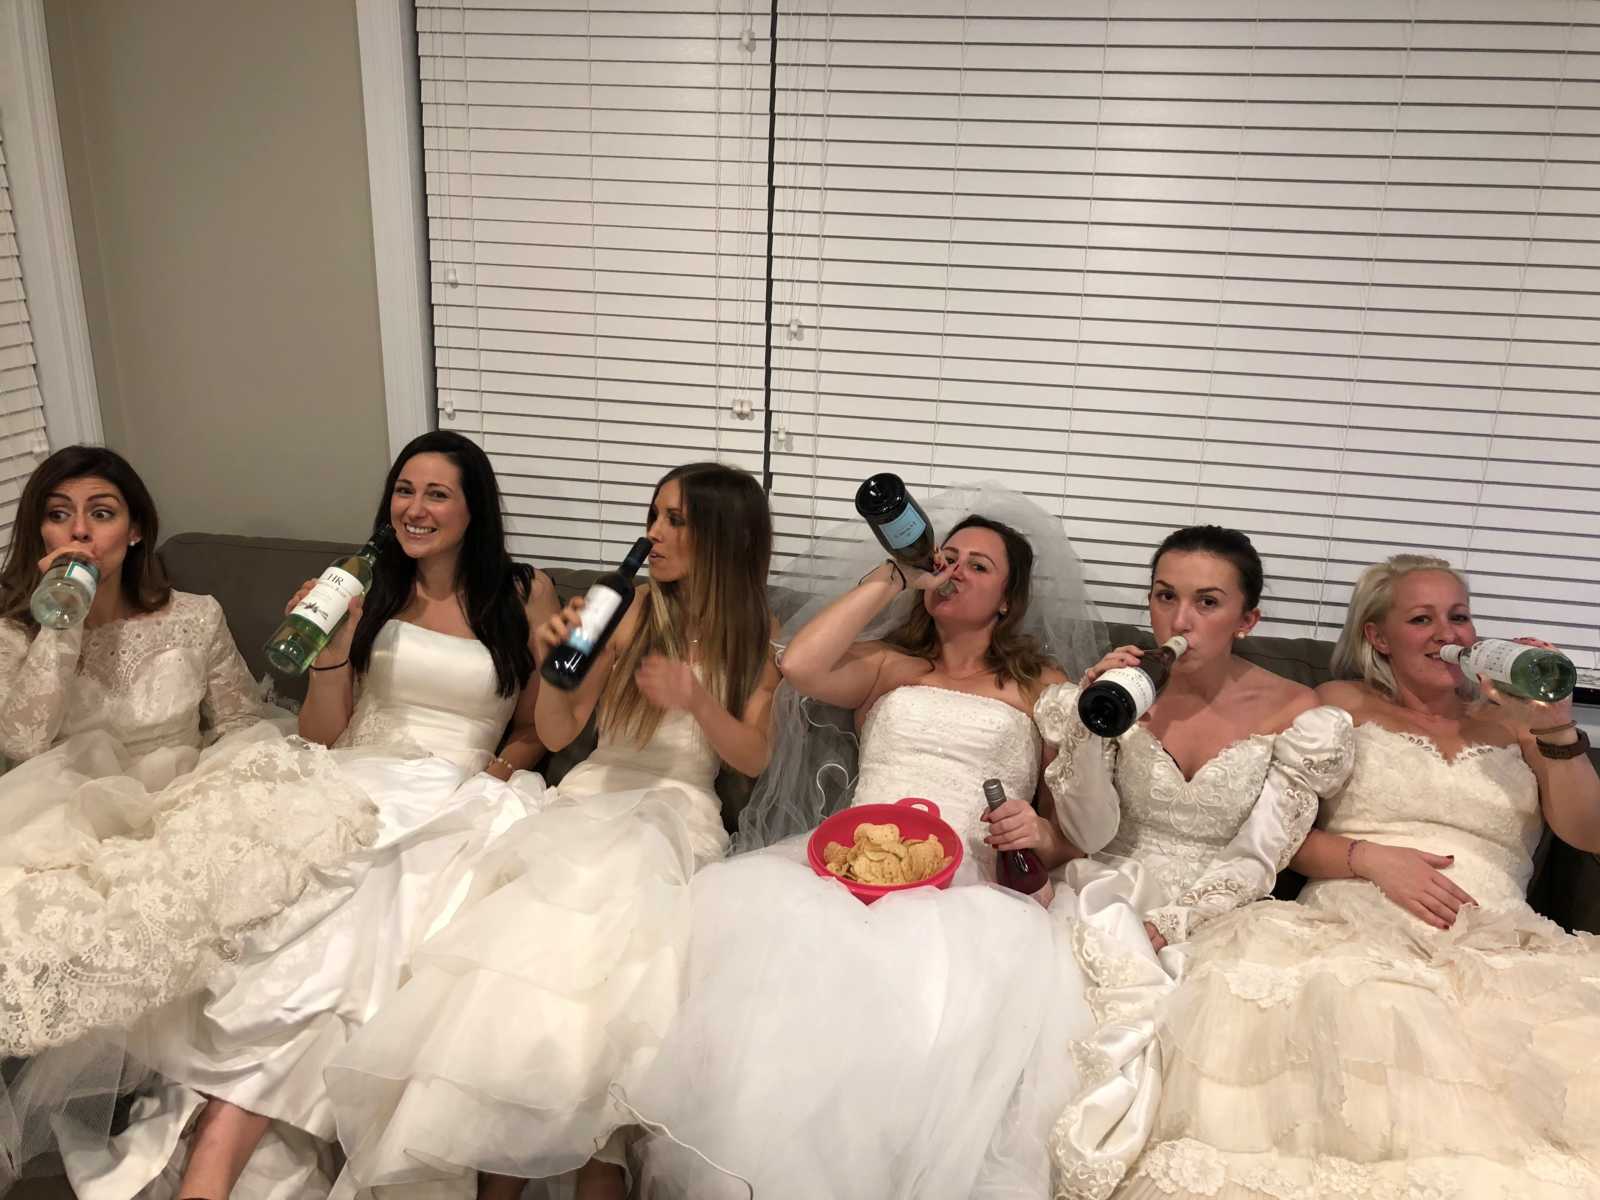 women sitting on a couch with wedding dresses on each holding their own bottle of wine